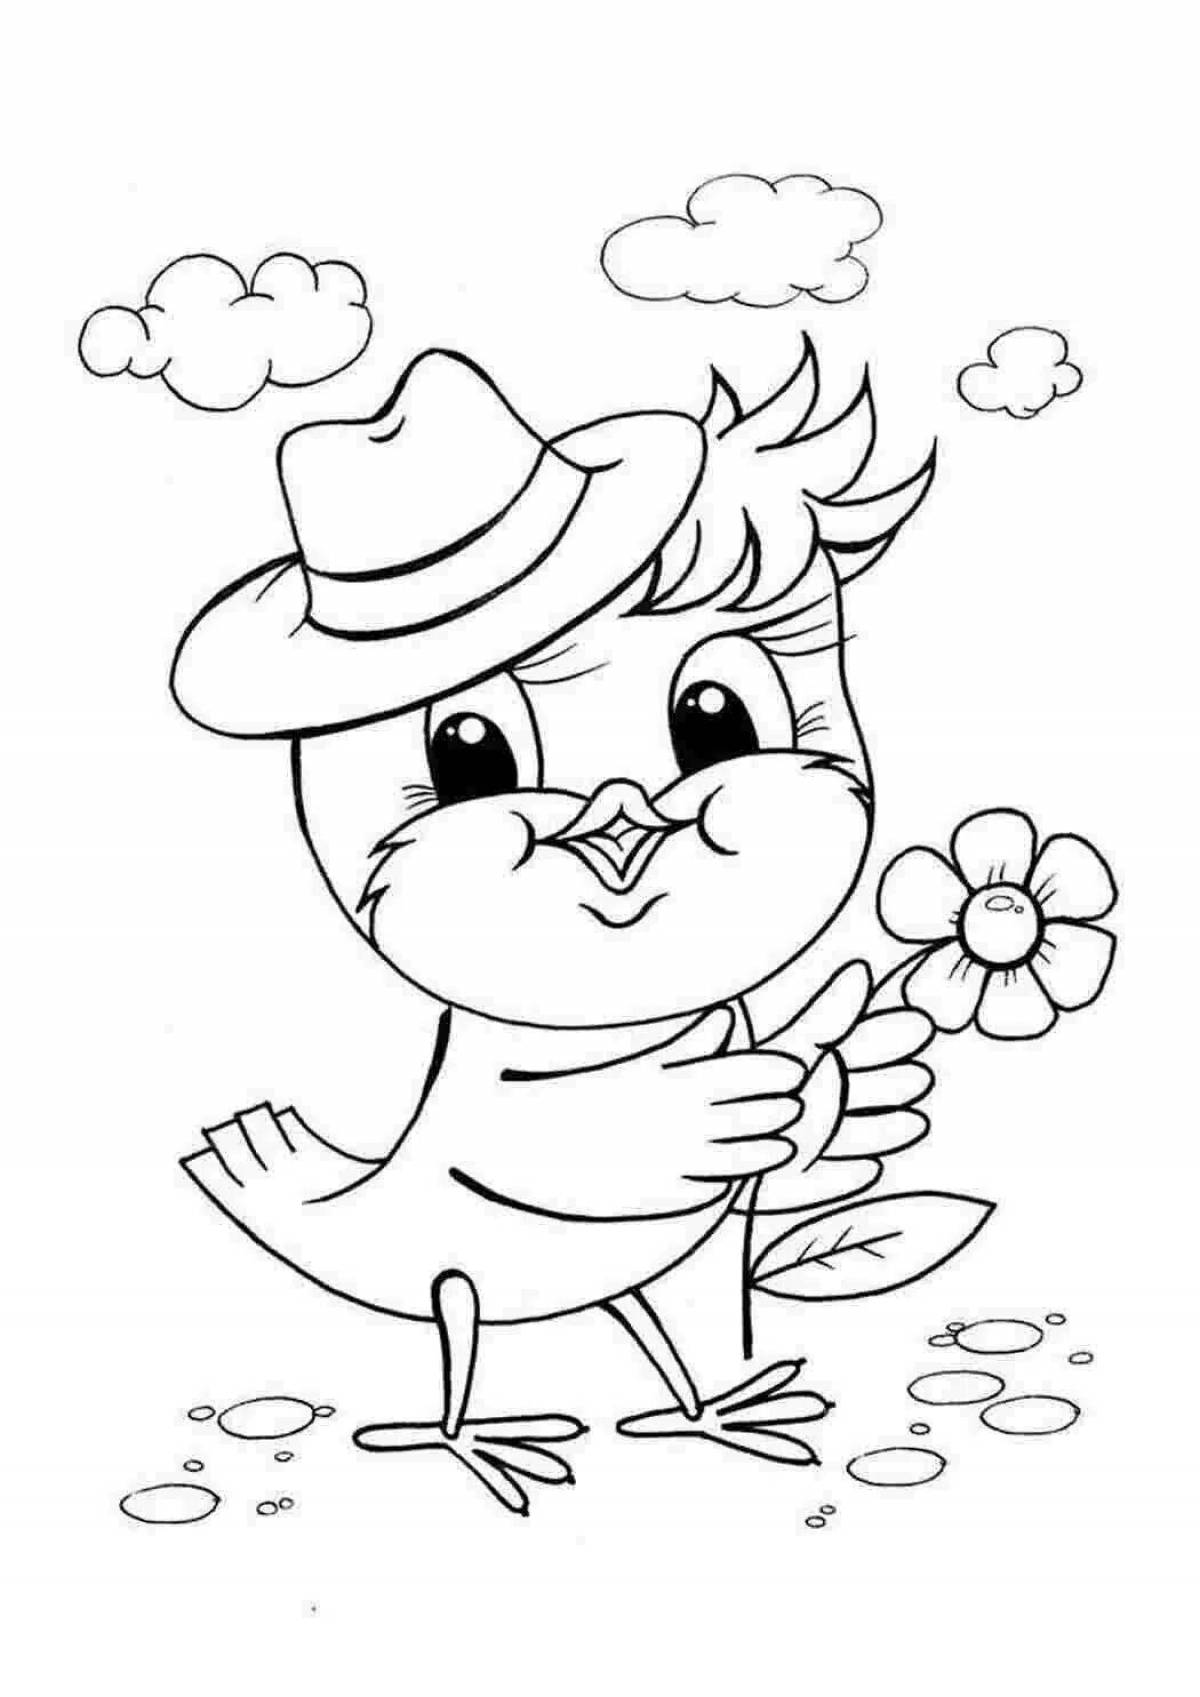 Cute birds coloring pages for kids